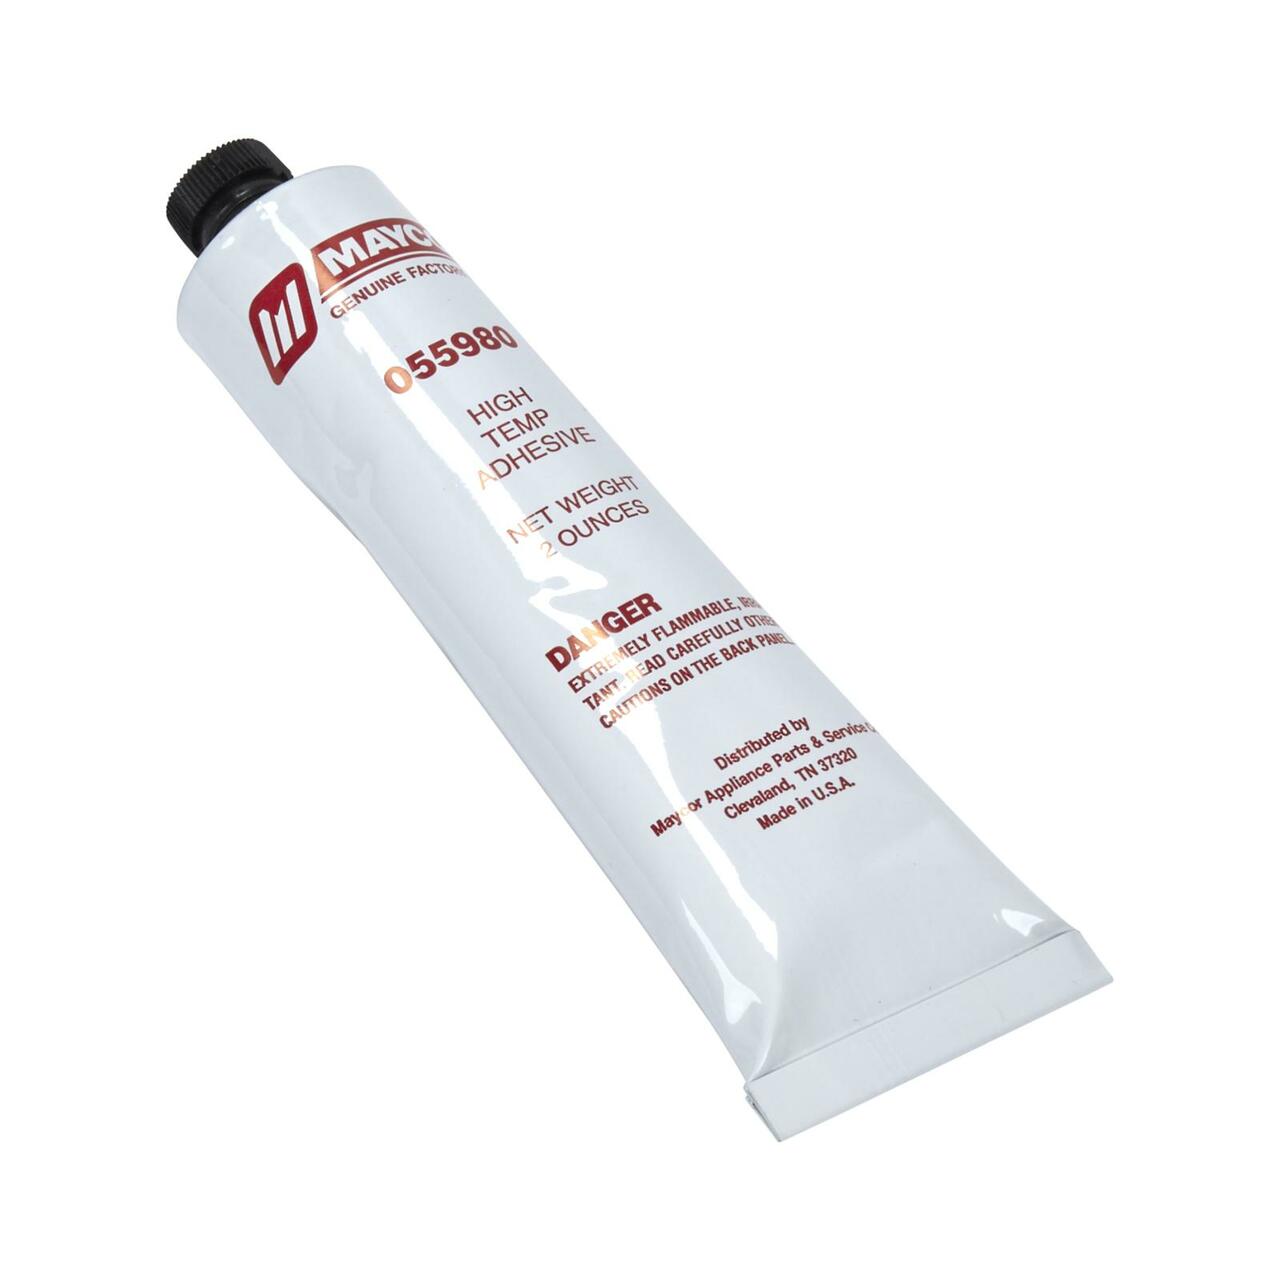 Whirlpool Dryer High Temperature Adhesive. Part #WPY055980